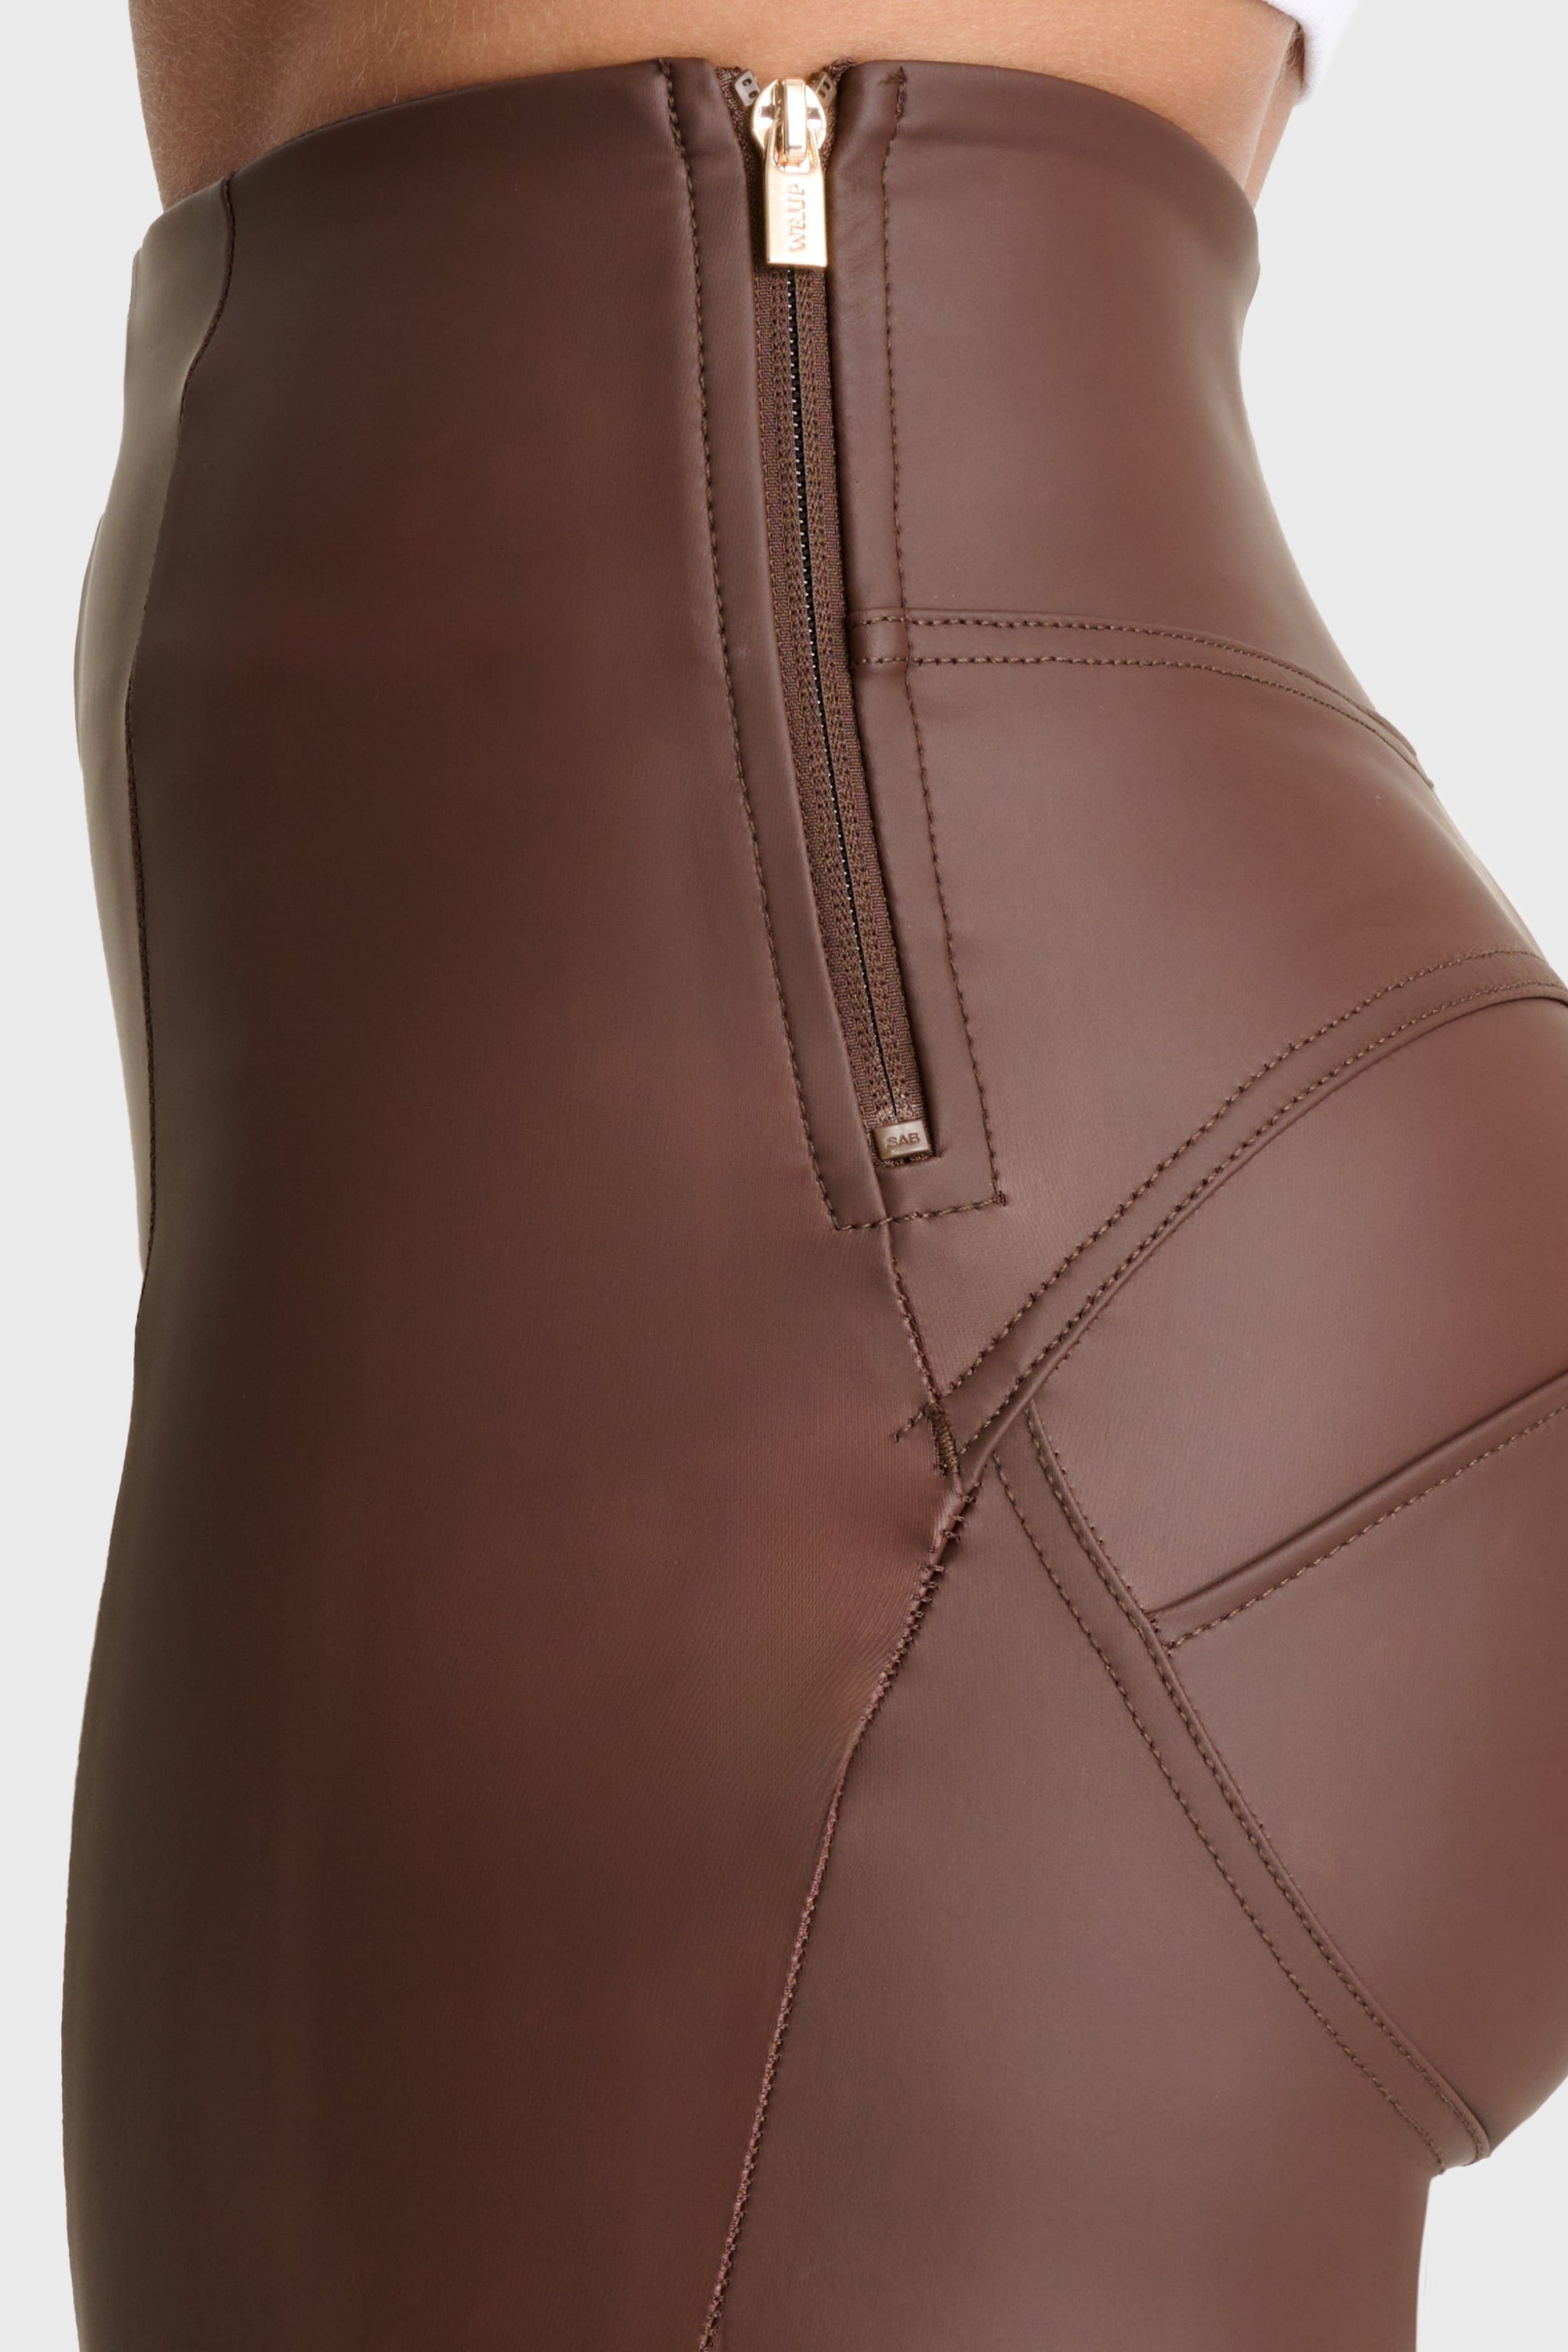 WR.UP® Faux Leather - Super High Waisted - Super Flare - Chocolate 9